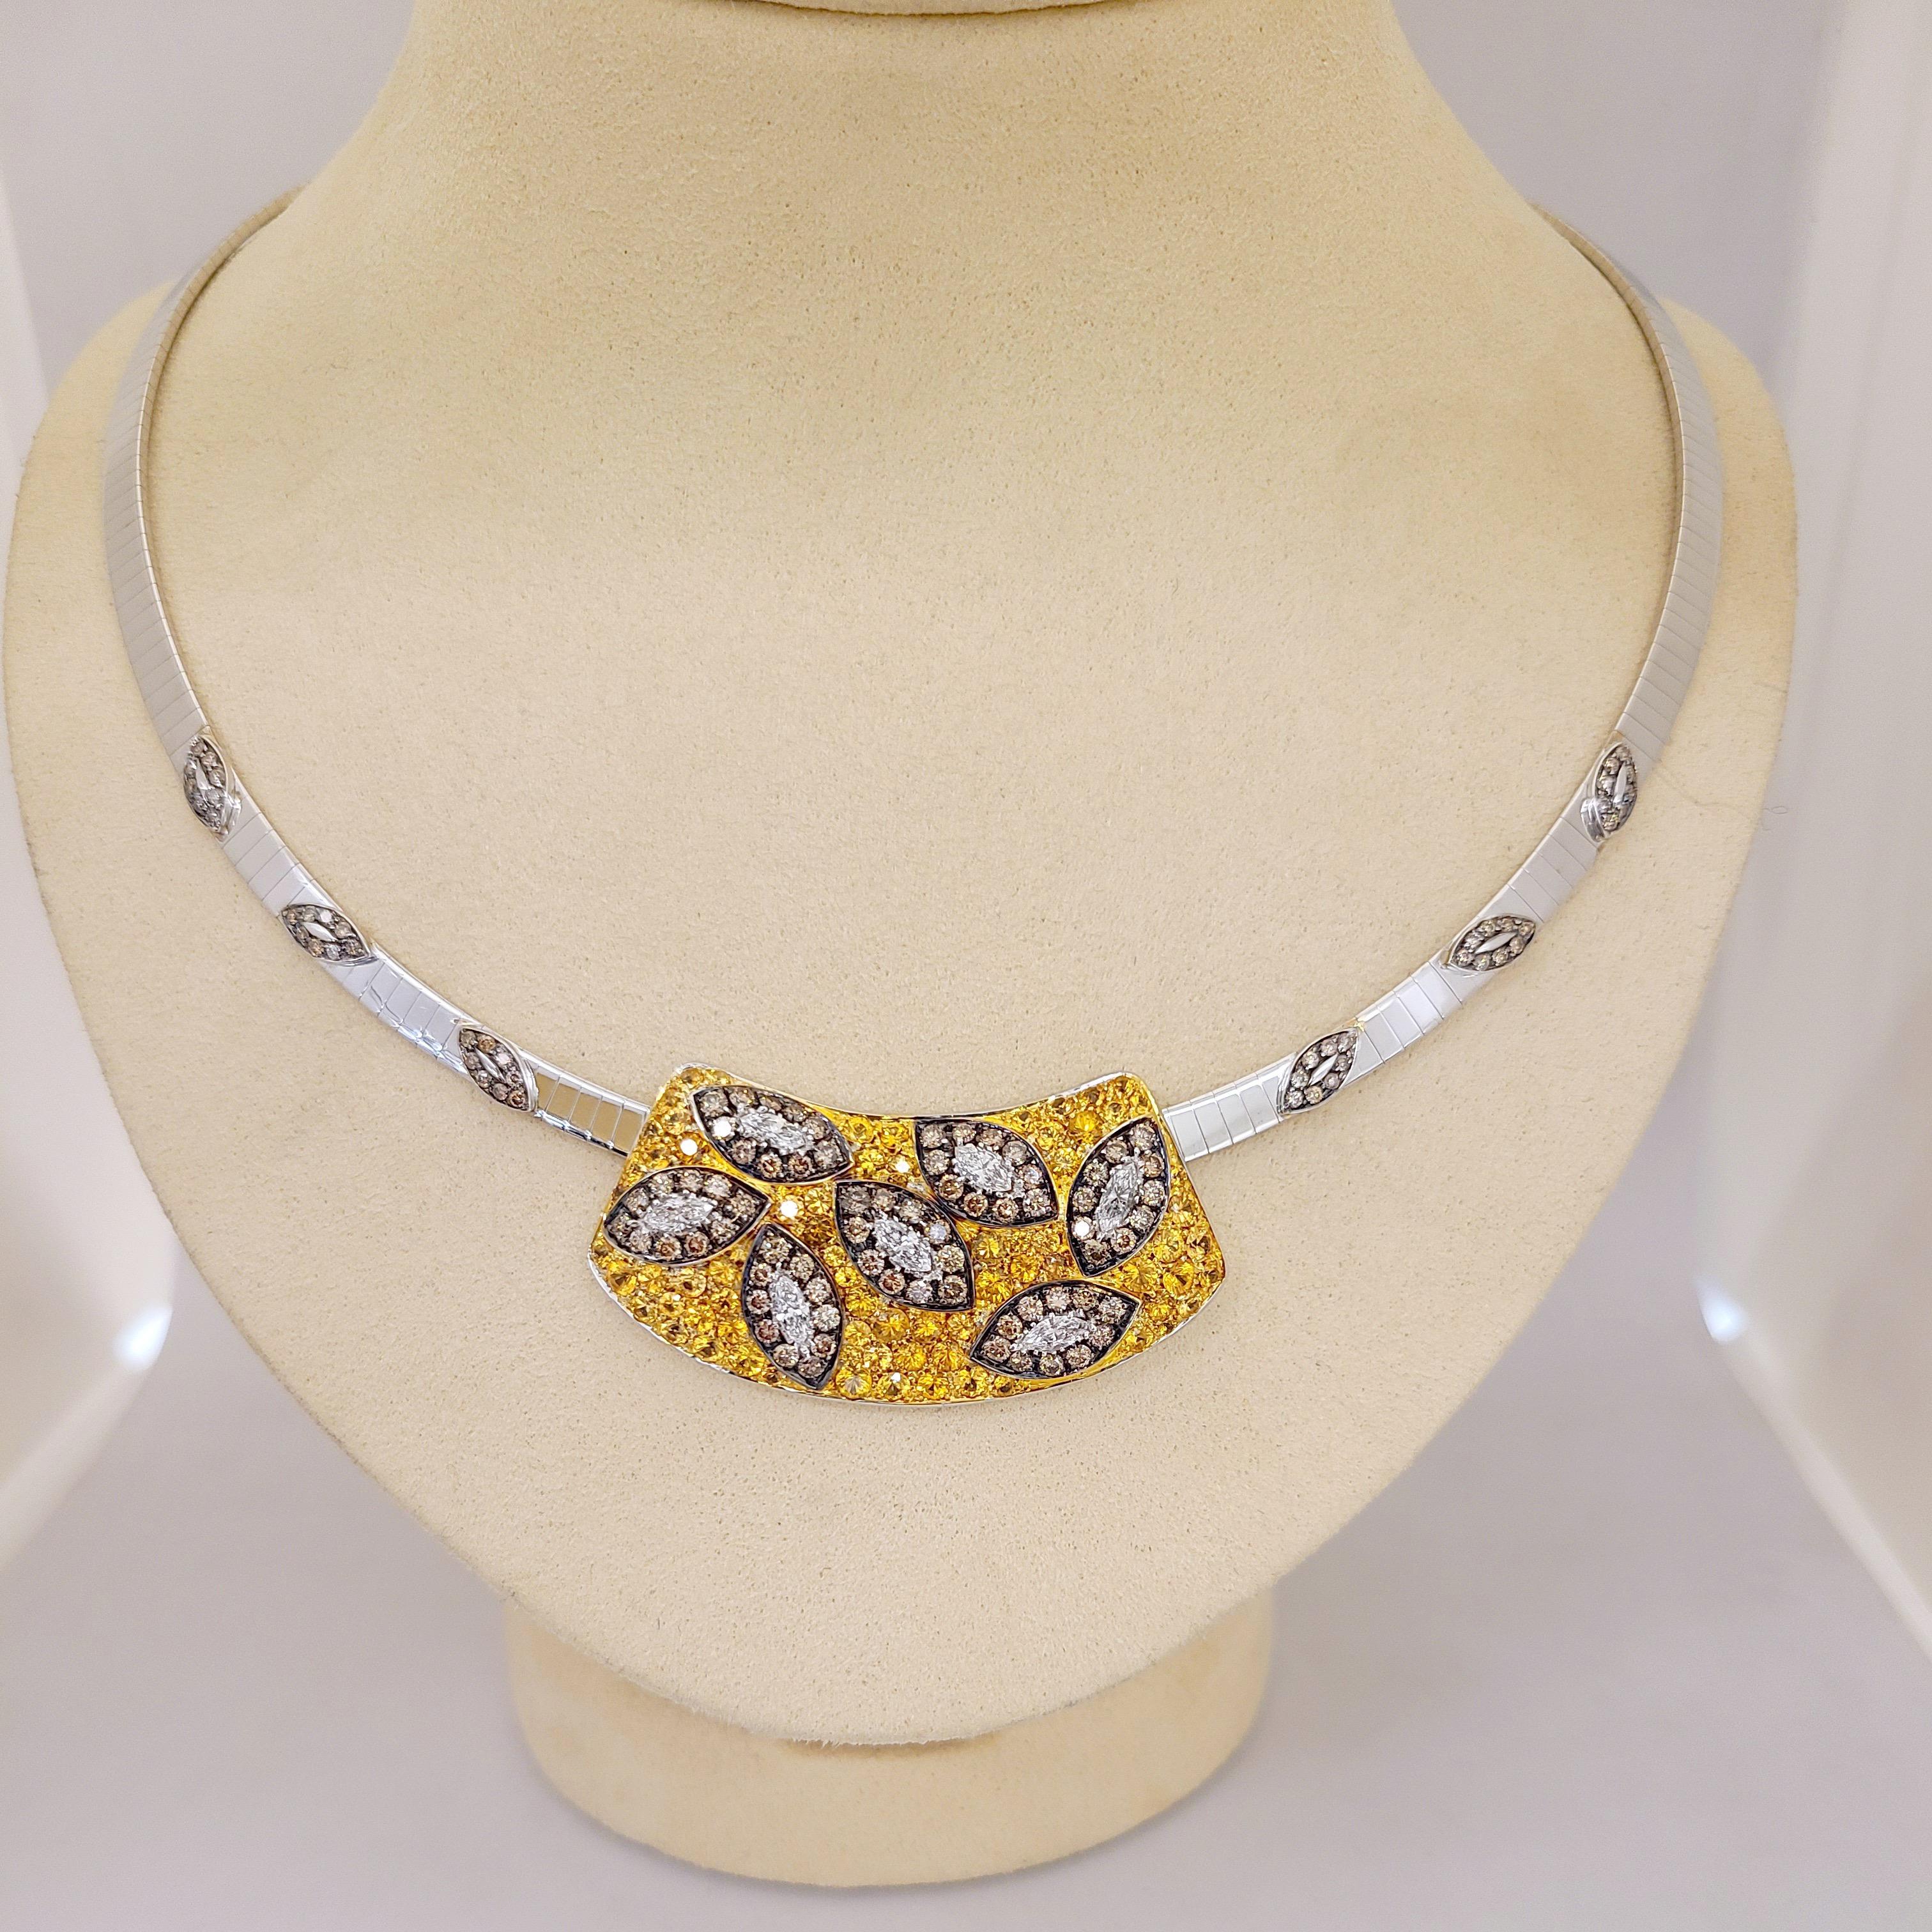 This stunning pendant  necklace was crafted by Italy's renowned Carlo Barberis known for his creativity and elegant touches of fantasy. Set in 18 karat white gold the yellow sapphire pendant is set with brown and white diamond leaves. The stationary